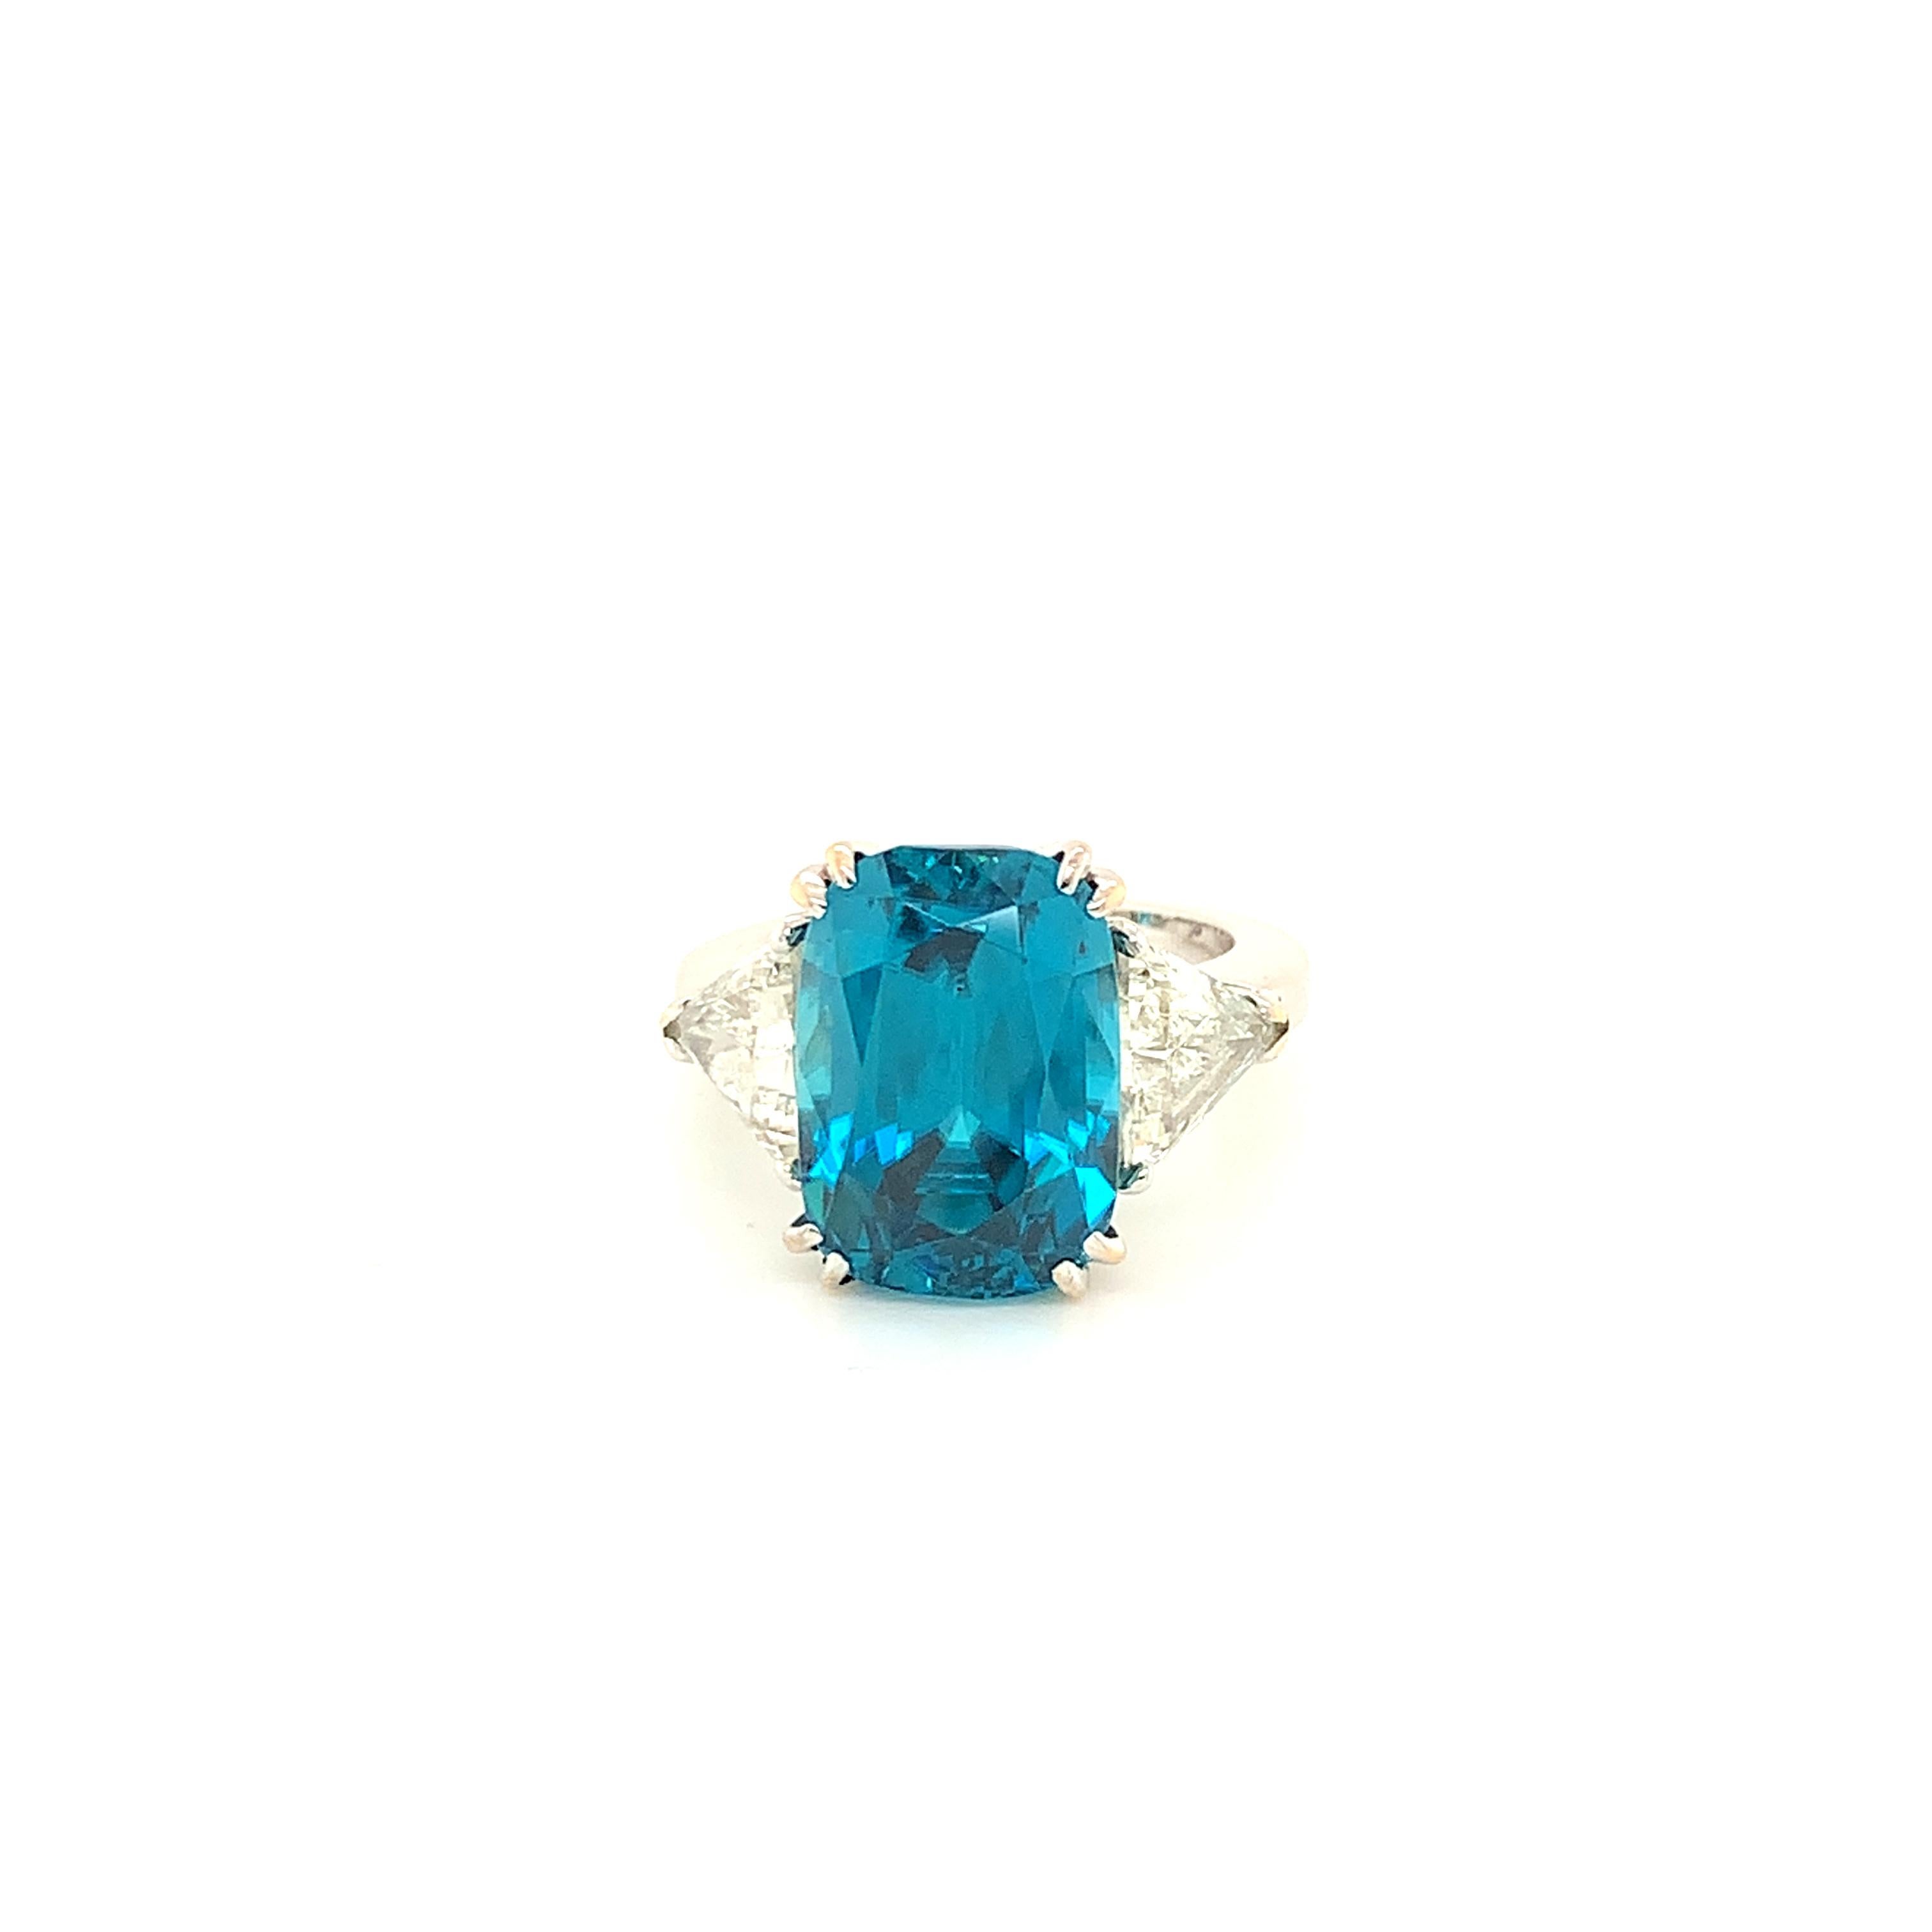 18K Gold Deep Blue zircon  16,61 Cts Ring with diamonds 1,50 Cts 
Deep blue ring set with a top blue zircon cushion cut 16.61 Cts, two diamonds side stones 
approx. 1,50 Cts .
Zircon is a beautiful, natural gemstone with a high refractive index and